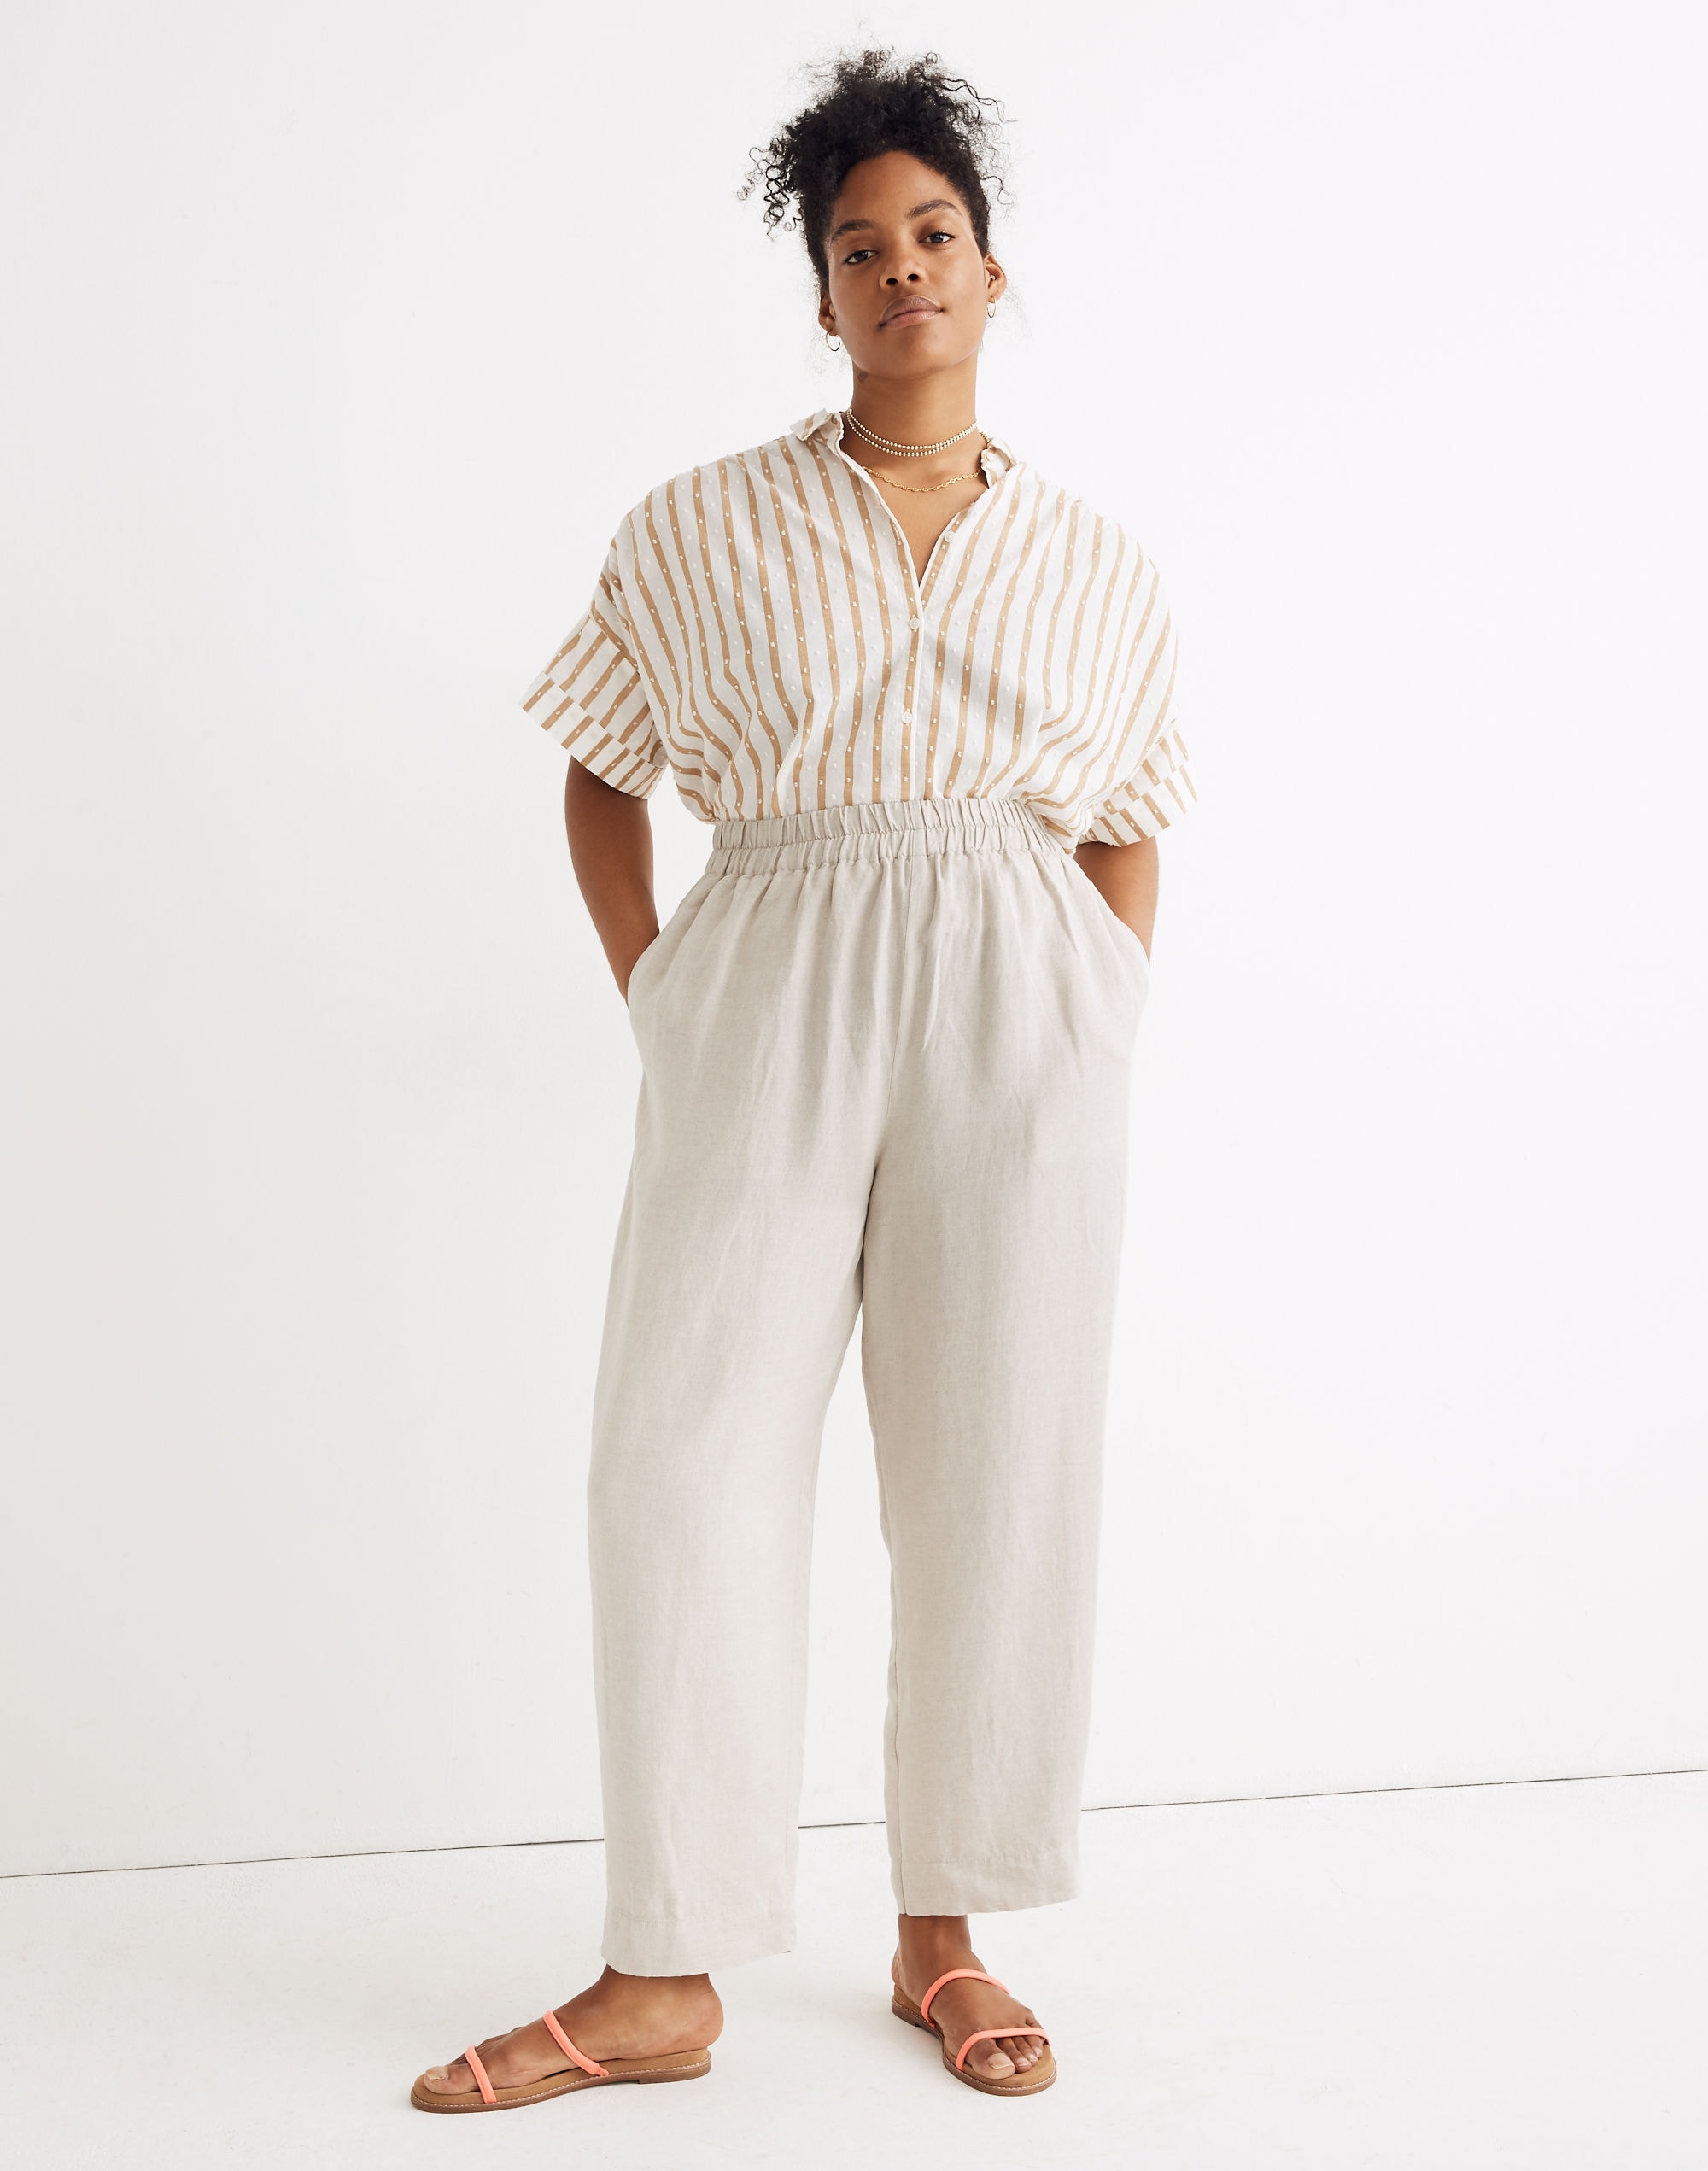 Madewell, Pants & Jumpsuits, Madewell Mwl Airyterry Sweatpants Womens 2x  Tapered Ankle Length Antique Cream